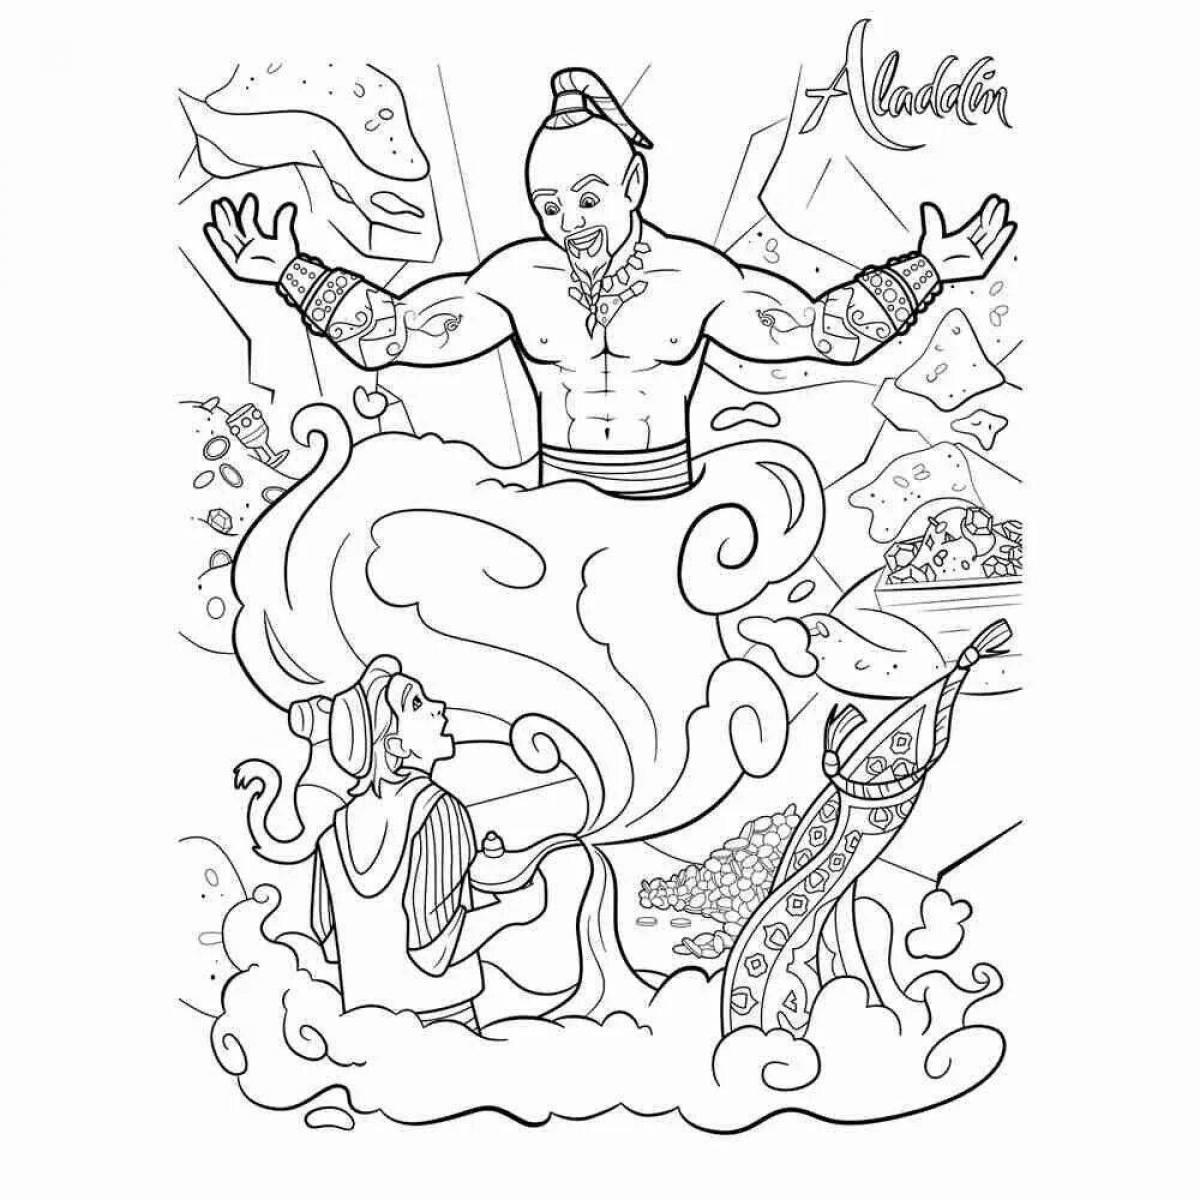 Animated genie coloring page